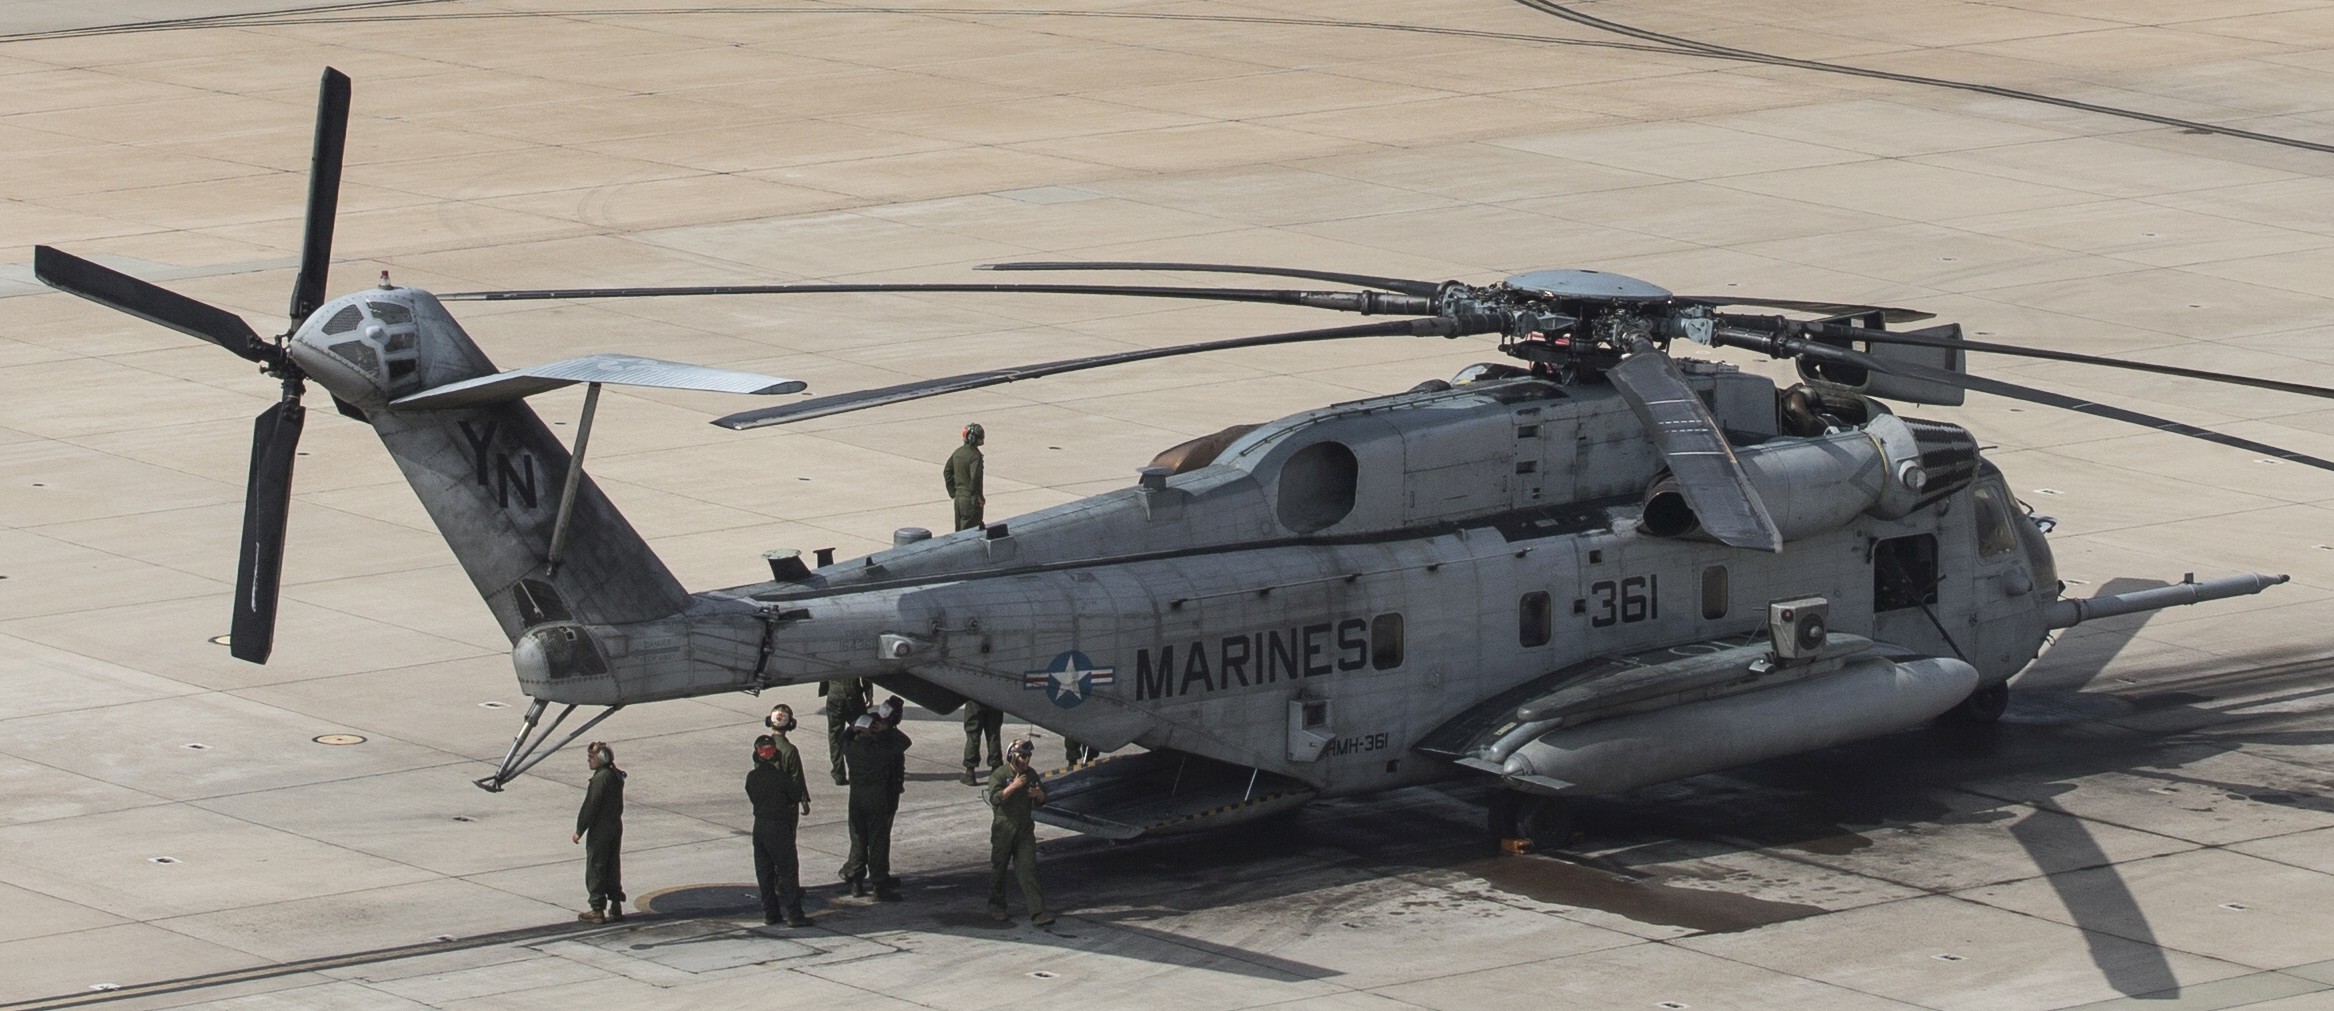 hmh-361 flying tigers marine heavy helicopter squadron usmc sikorsky ch-53e super stallion 45 mcas miramar